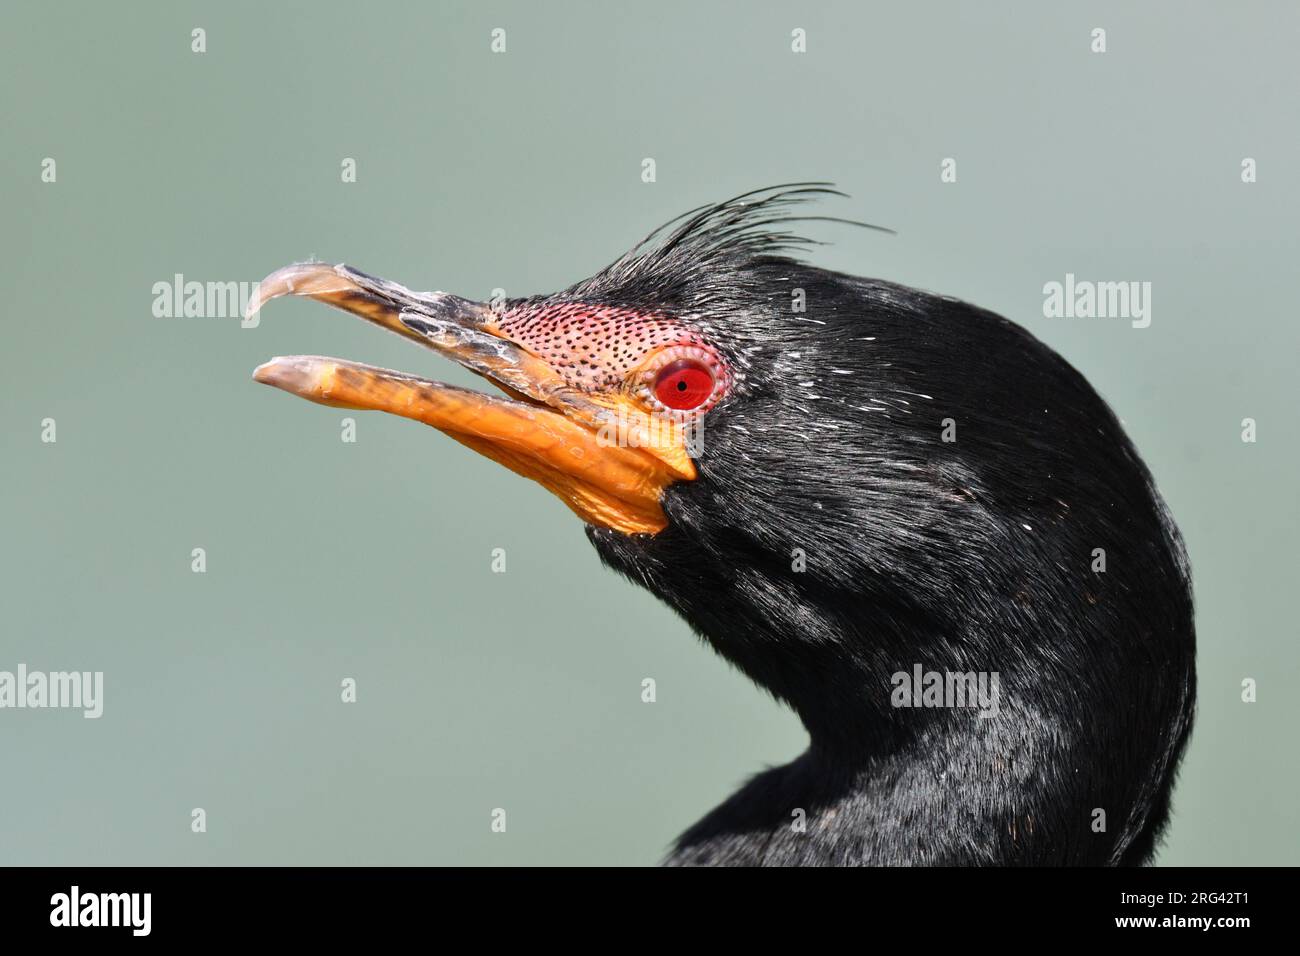 Adult Crowned Cormorant (Microcarbo coronatus) at Swakopmund in Namibia. An endemic of the cold Benguela Current of southern Africa. Stock Photo